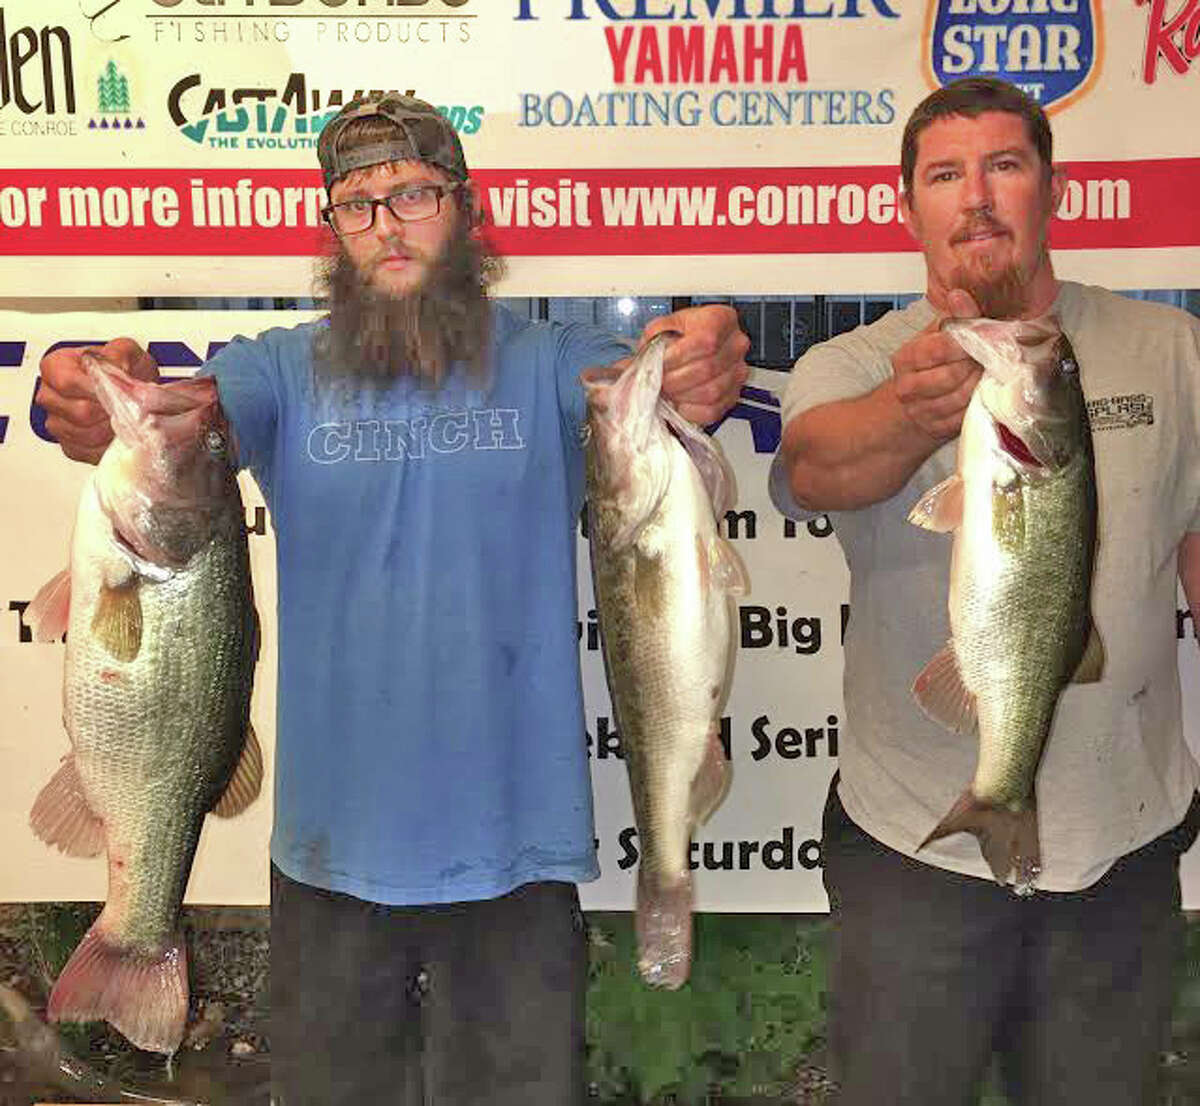 Brett Gage and Grant Rodgers came in first place in the CONROEBASS Tuesday Night Tournament with a weight of 15.18 pounds.